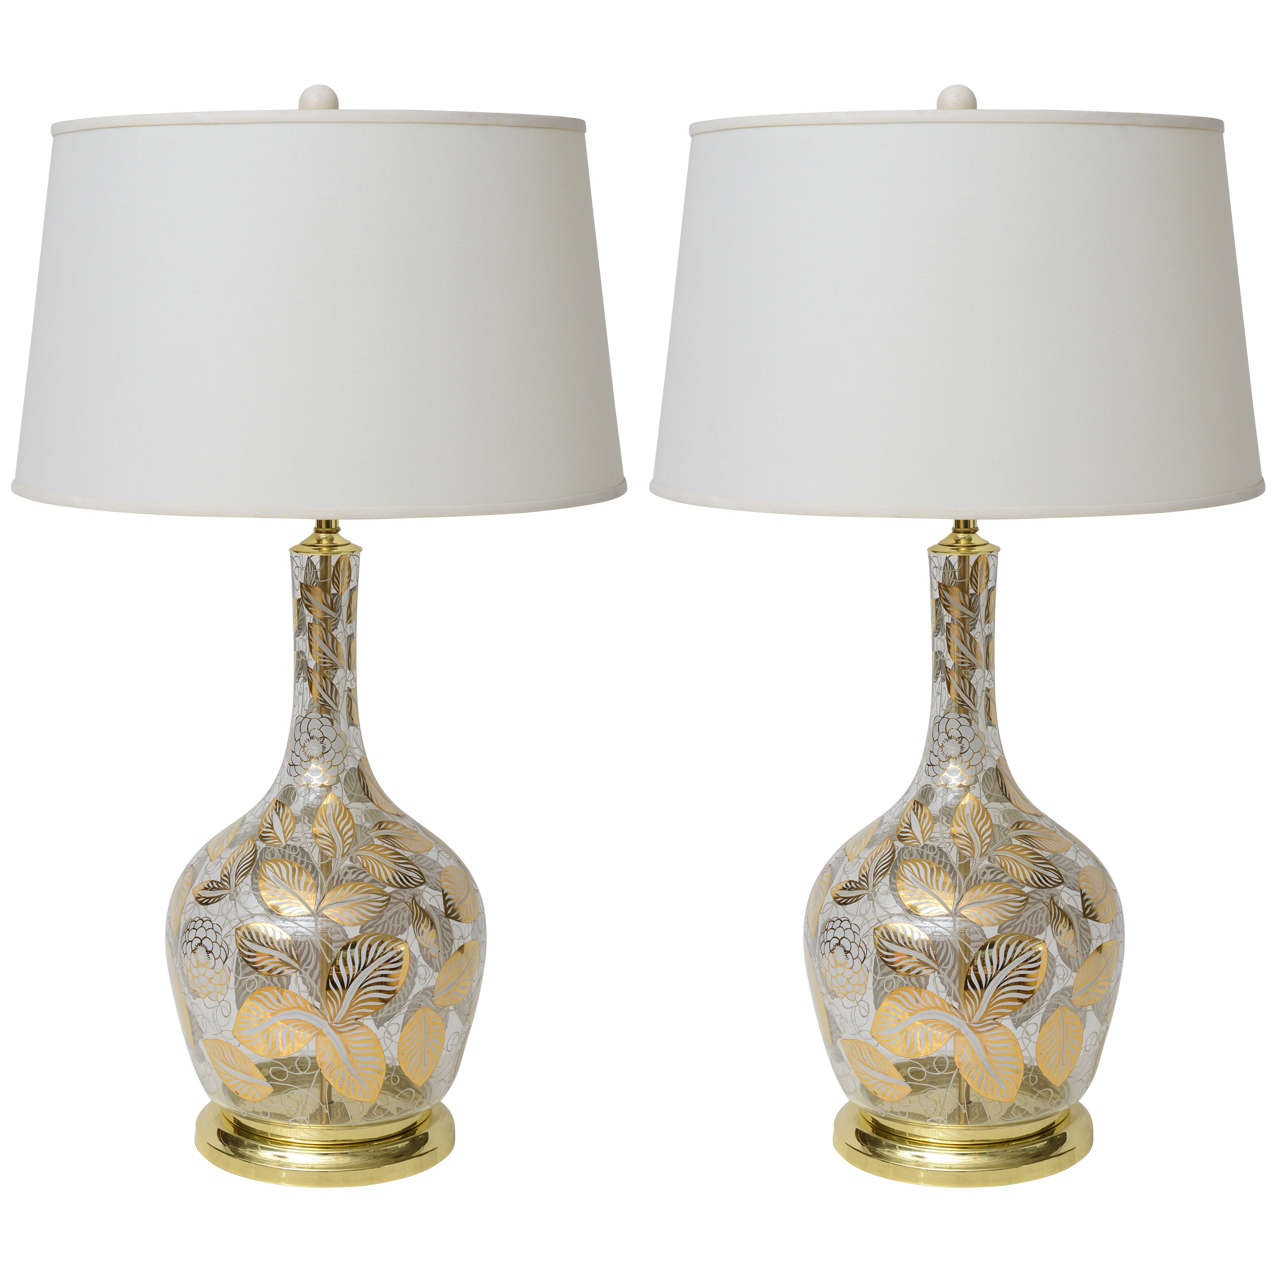 Pair of Midcentury Painted Glass Lamps